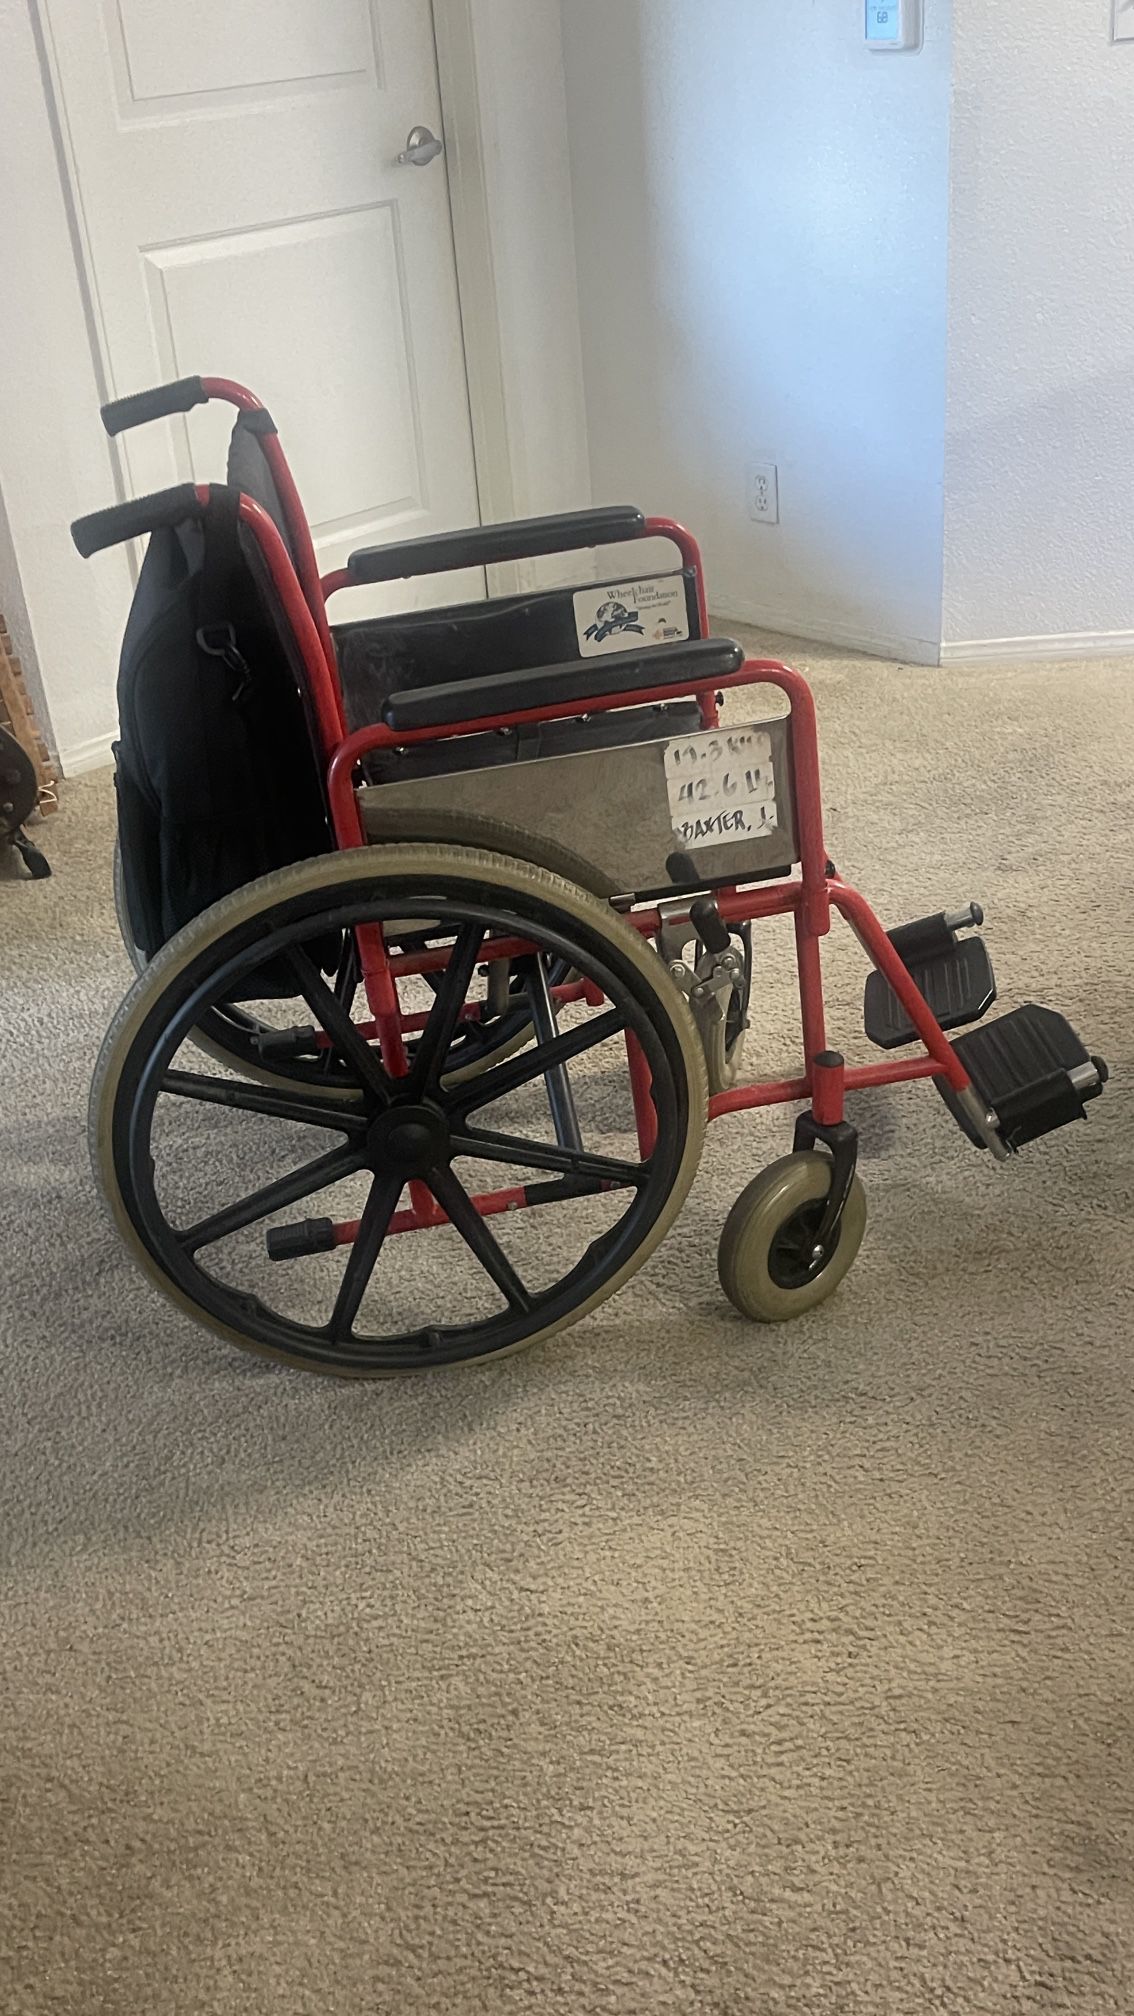 Wheelchair, Gel Seat, And Carrying Bag